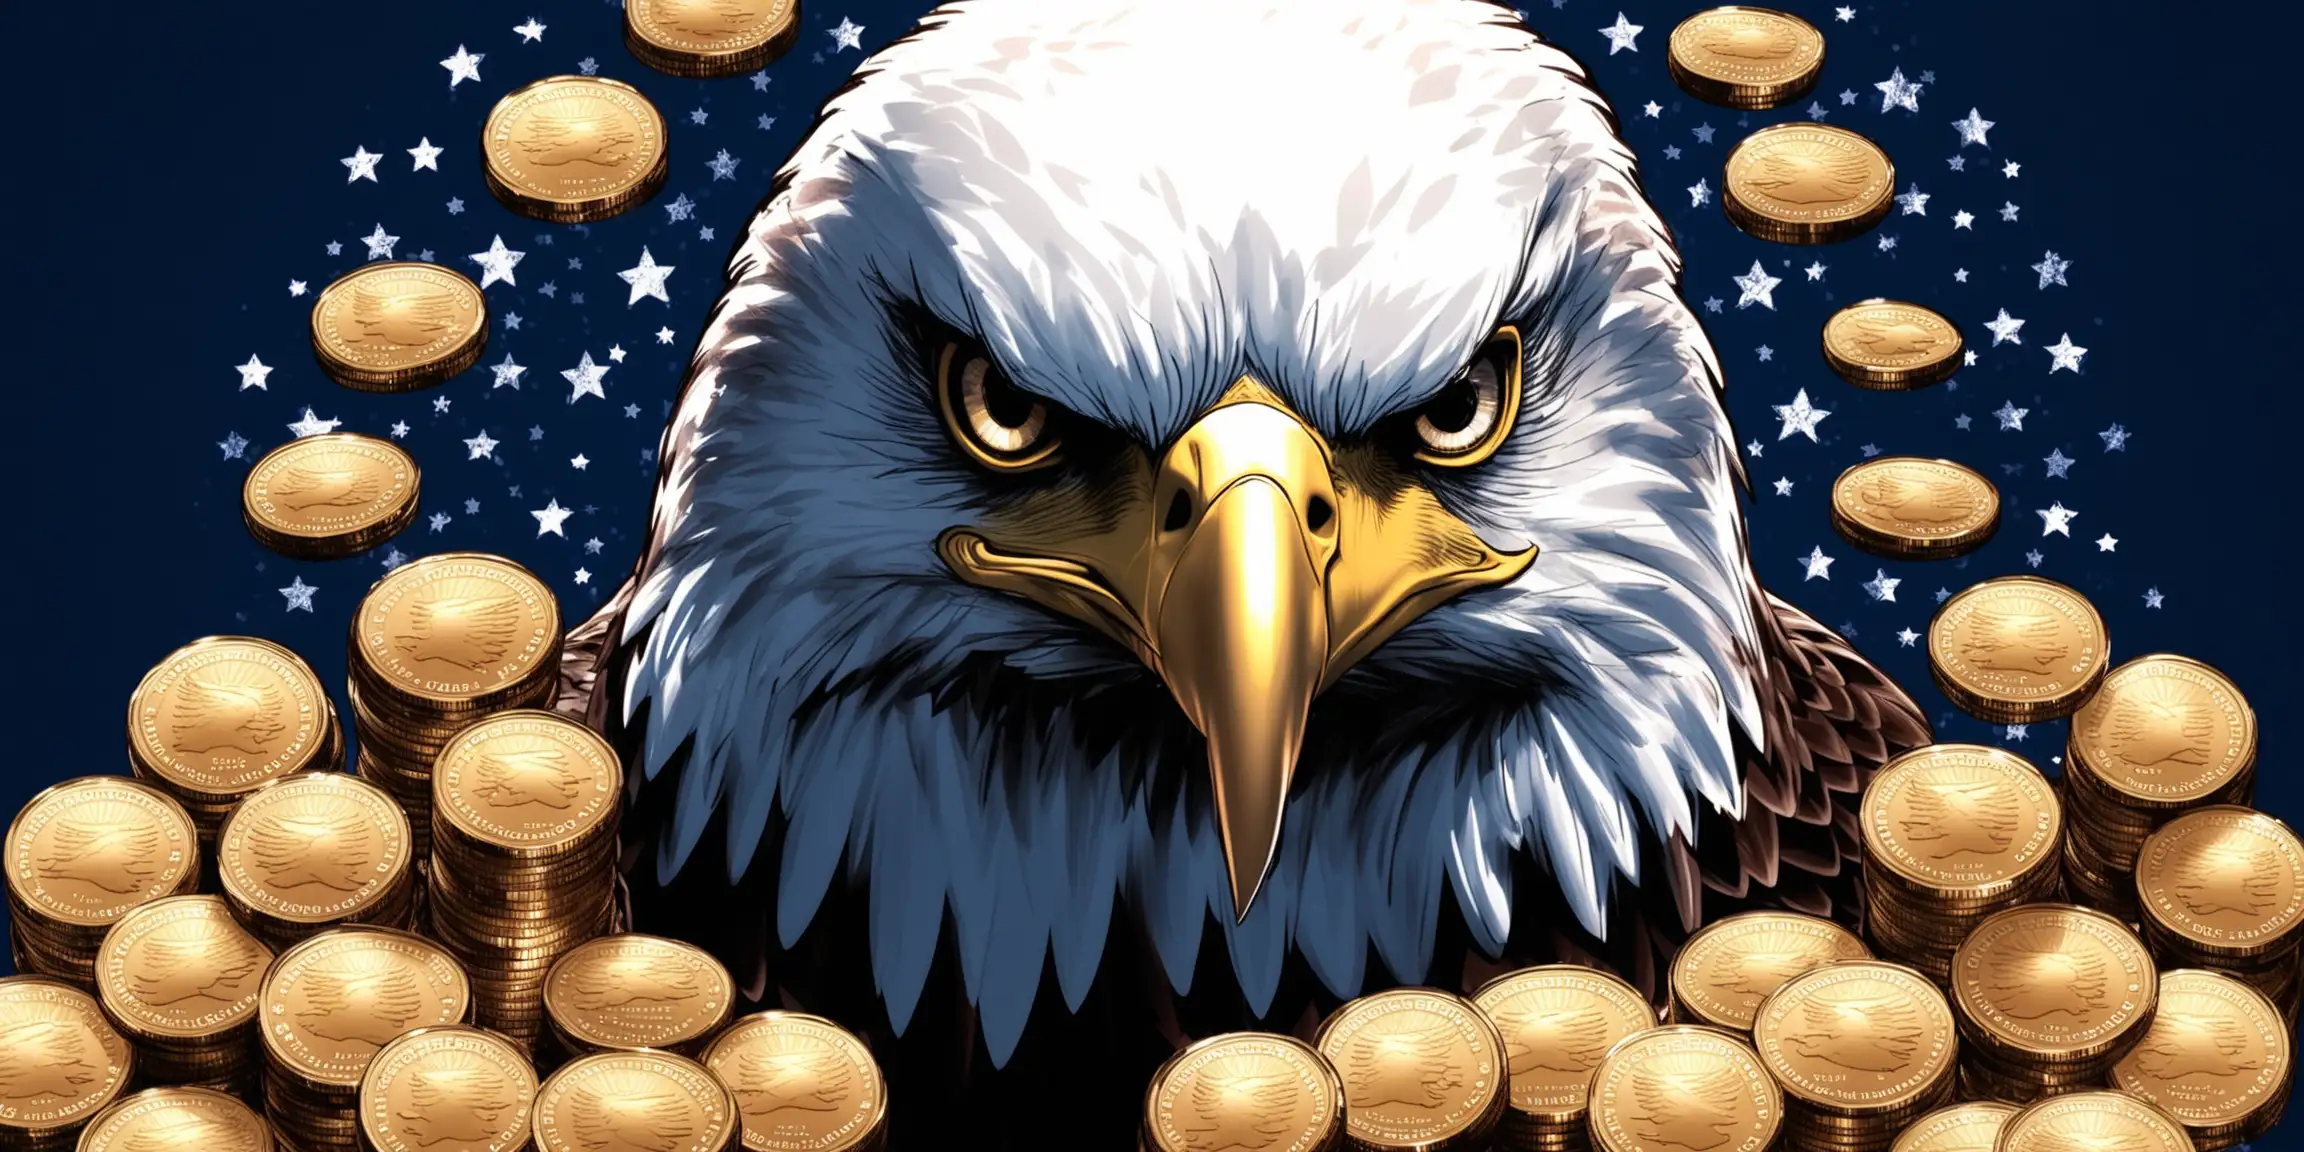 Awesome bald eagle head staring at many united states trust coin crypto coins on a midnight blue background 